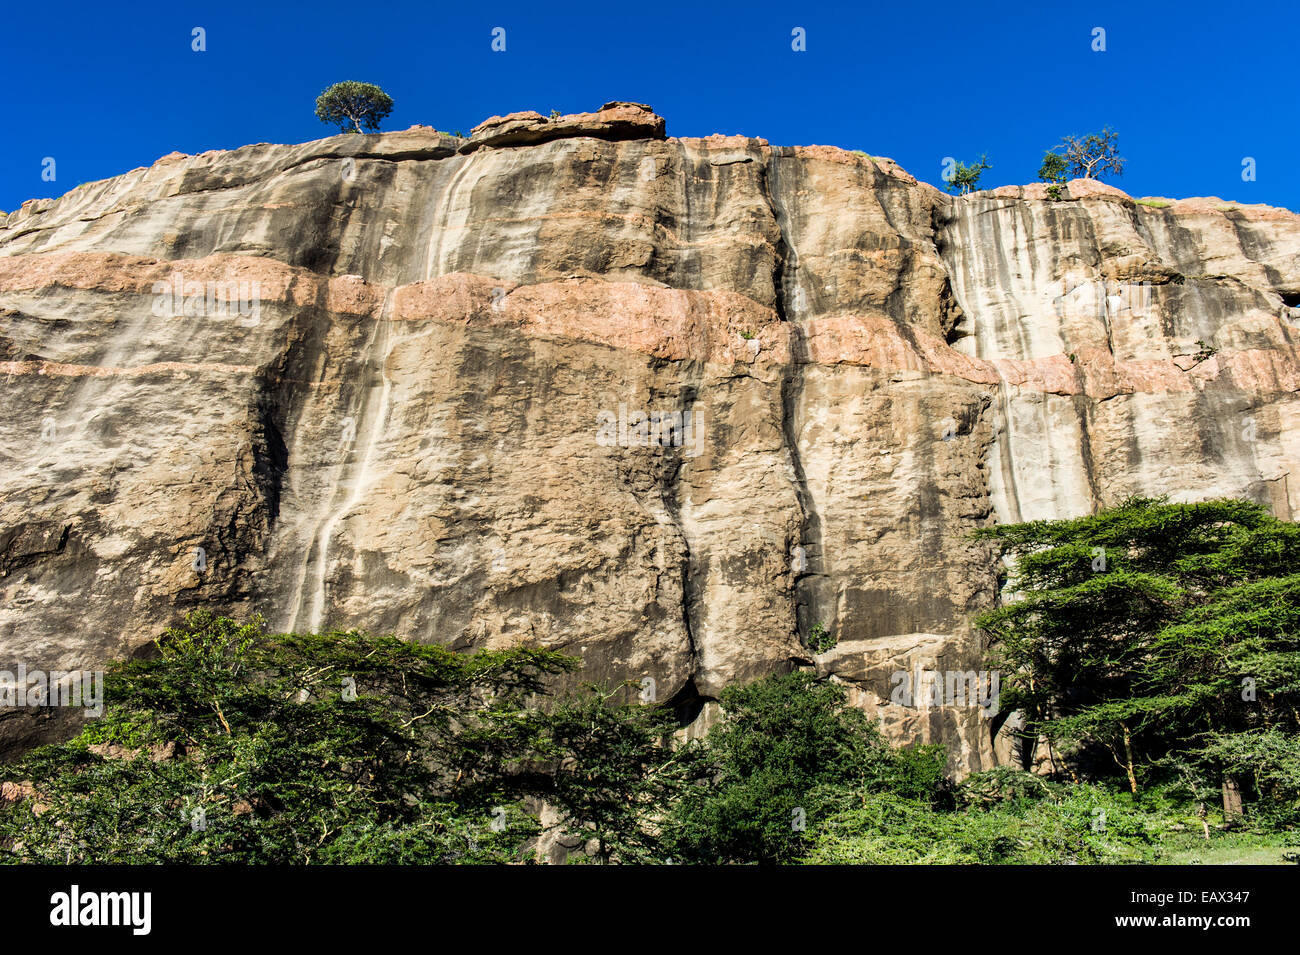 An Acacia woodland canopy at the base of a sheer cliff of a rocky outcrop. Stock Photo